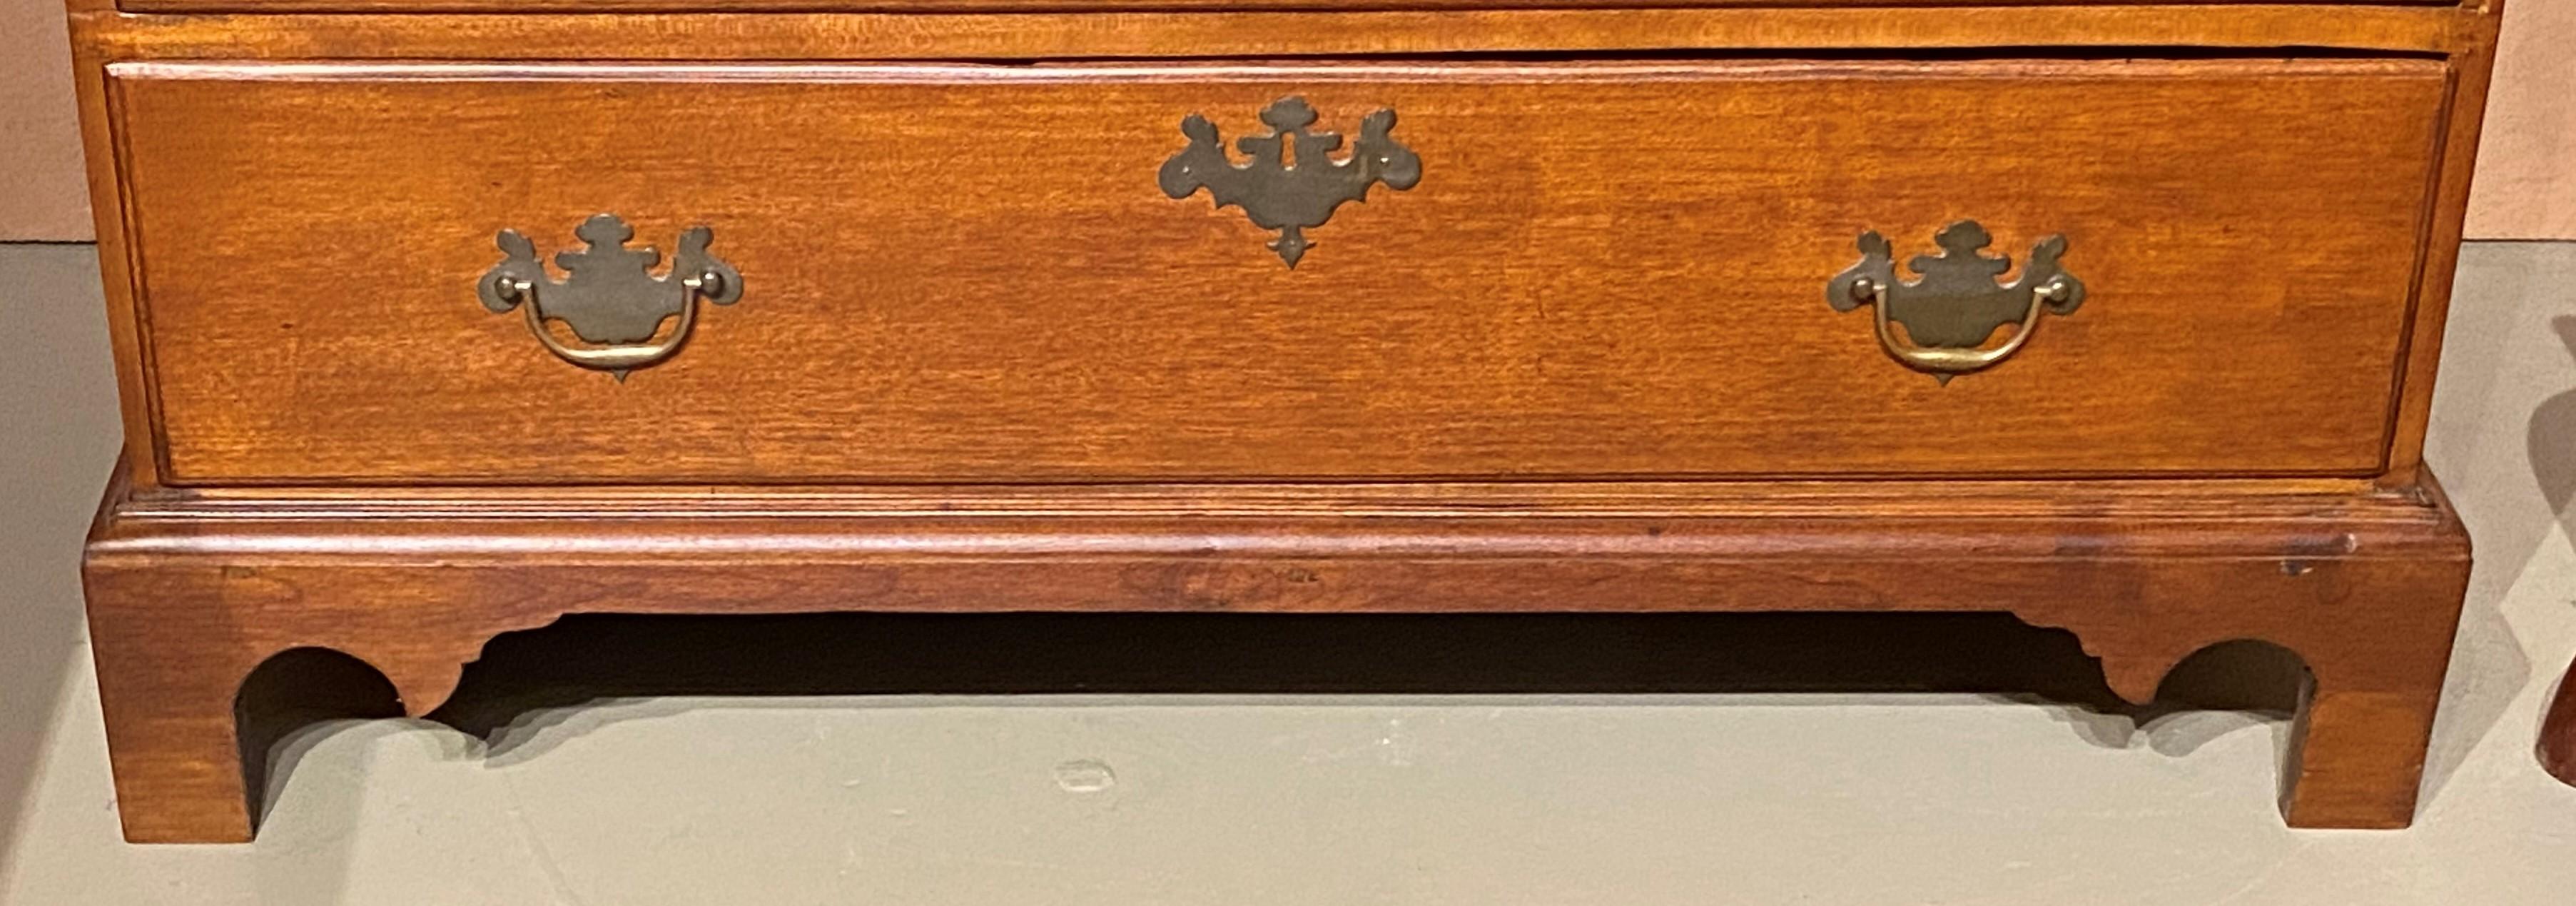 American 18th Century Maple and Tiger Maple Slant Front Desk For Sale